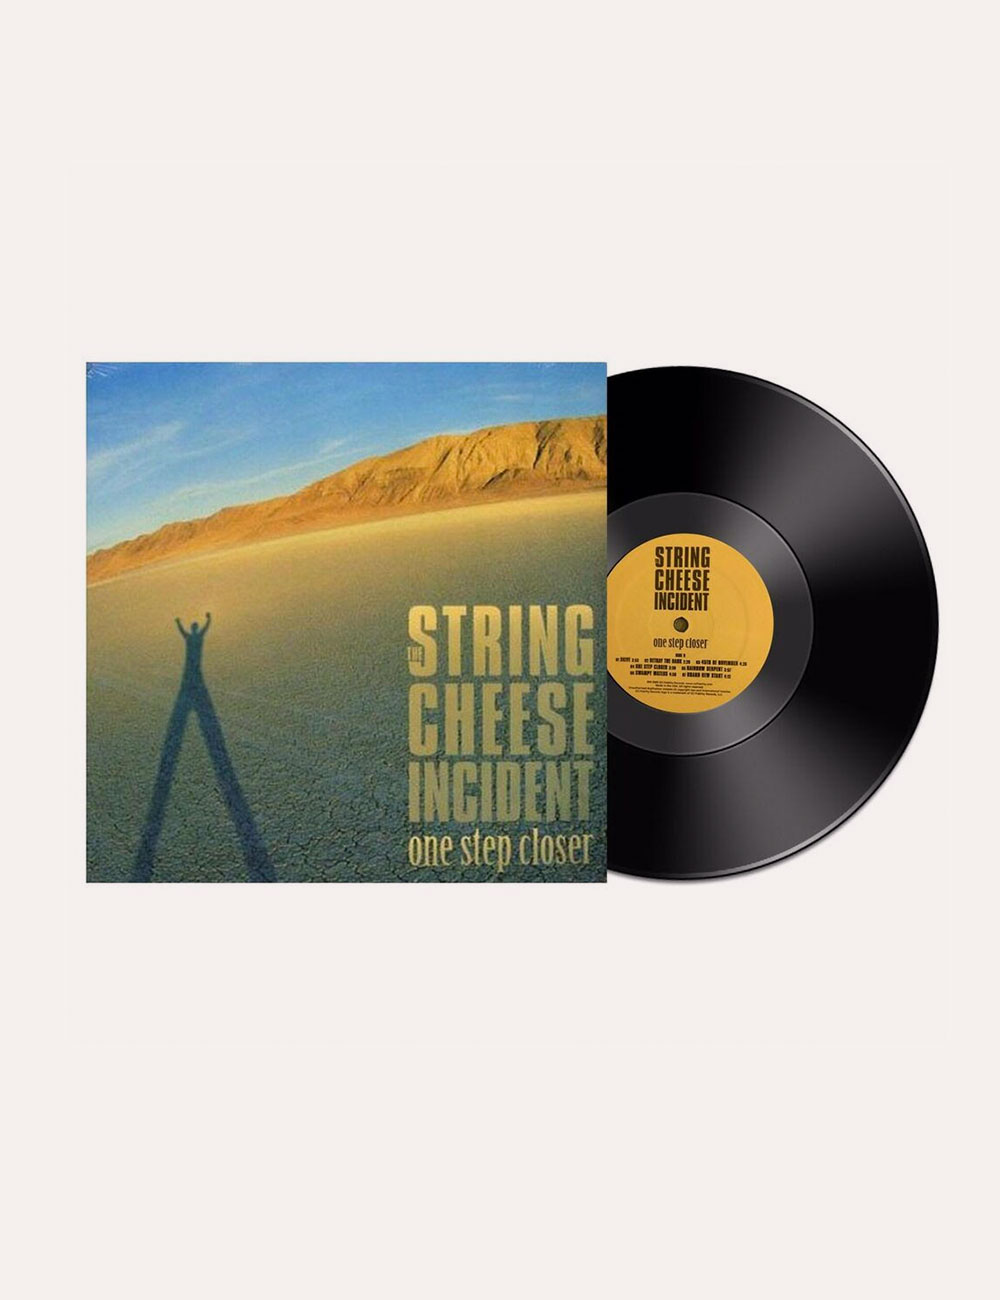 The String Cheese Incident - One Step Closer - Vinyl Album - Music